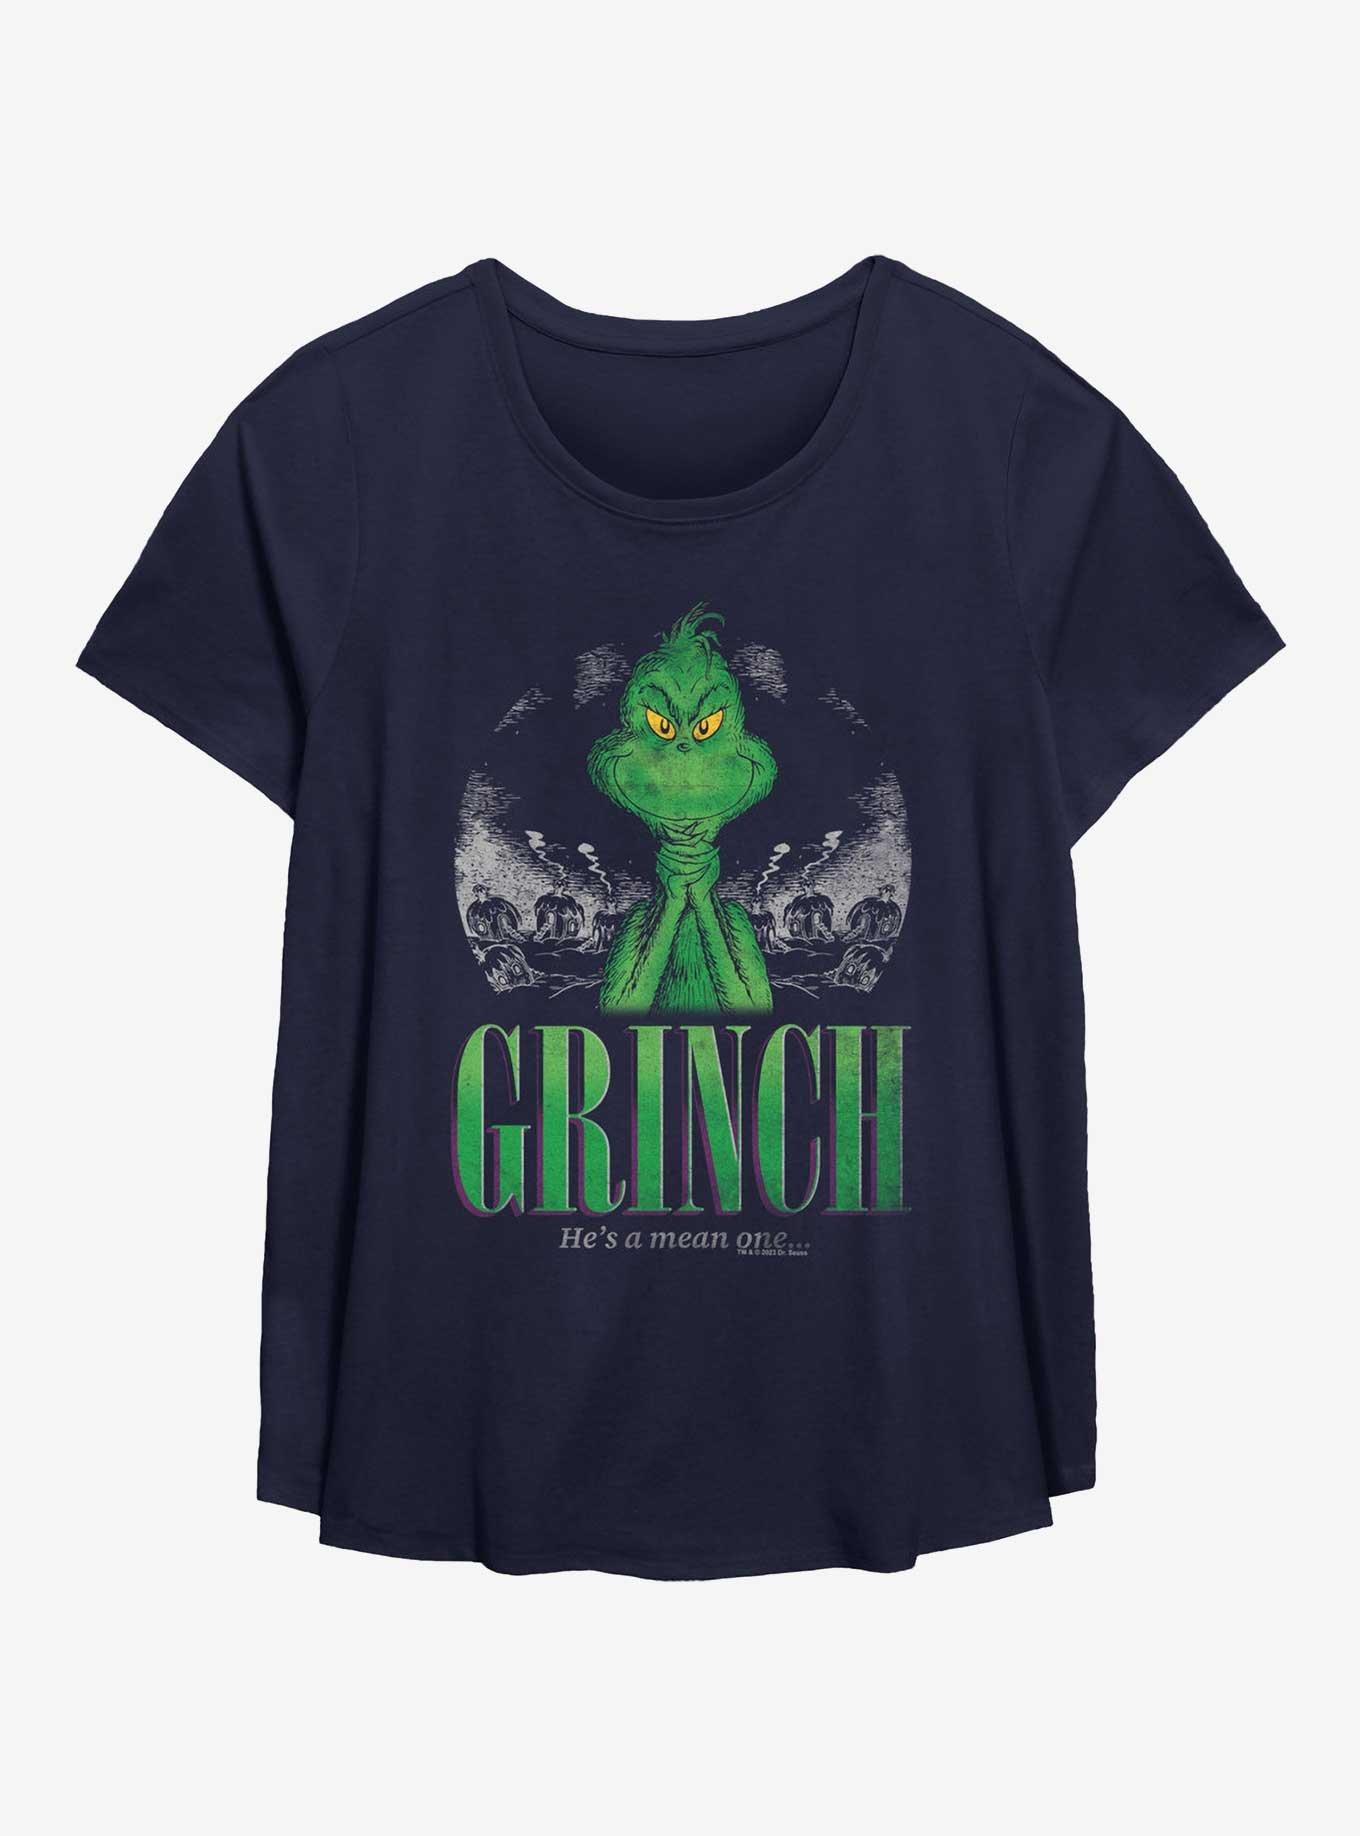 Dr. Seuss How The Grinch Stole Christmas He's A Mean One Womens T-Shirt Plus Size, NAVY, hi-res